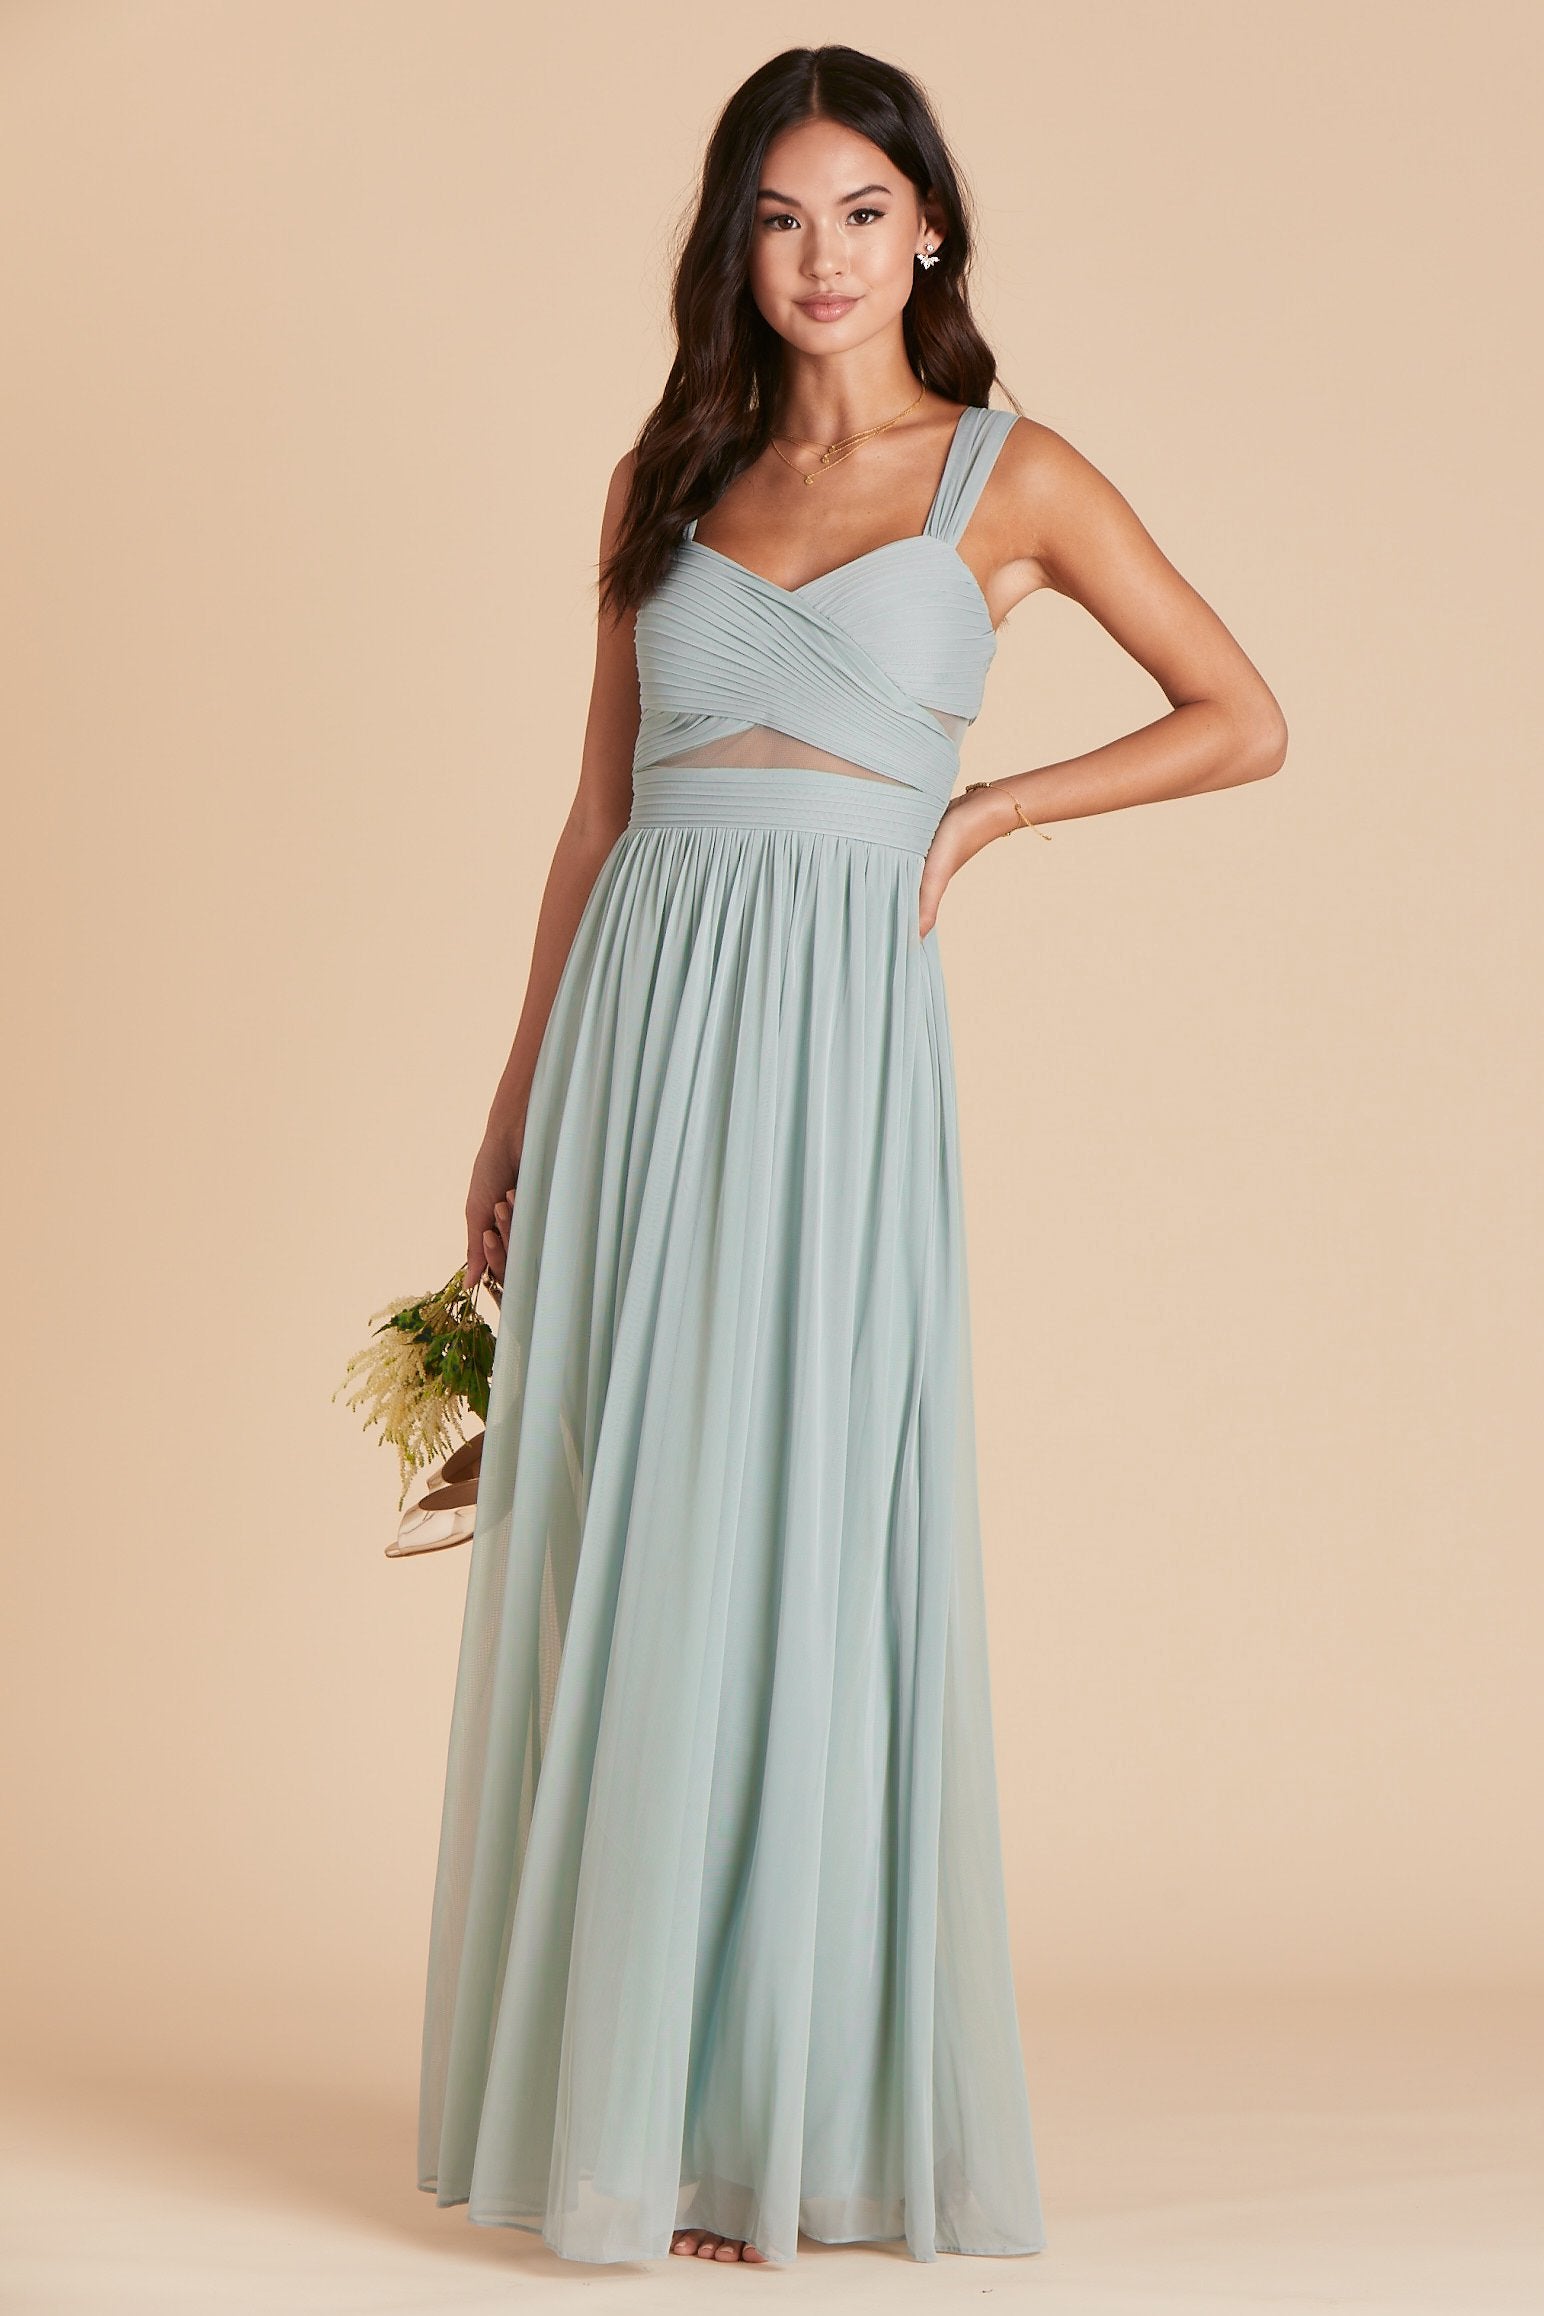 Front view of the Elsye Bridesmaid Dress in sage mesh features a fitted bust and waist with peekaboo cutouts showing a hint of skin at the waist and under each arm.